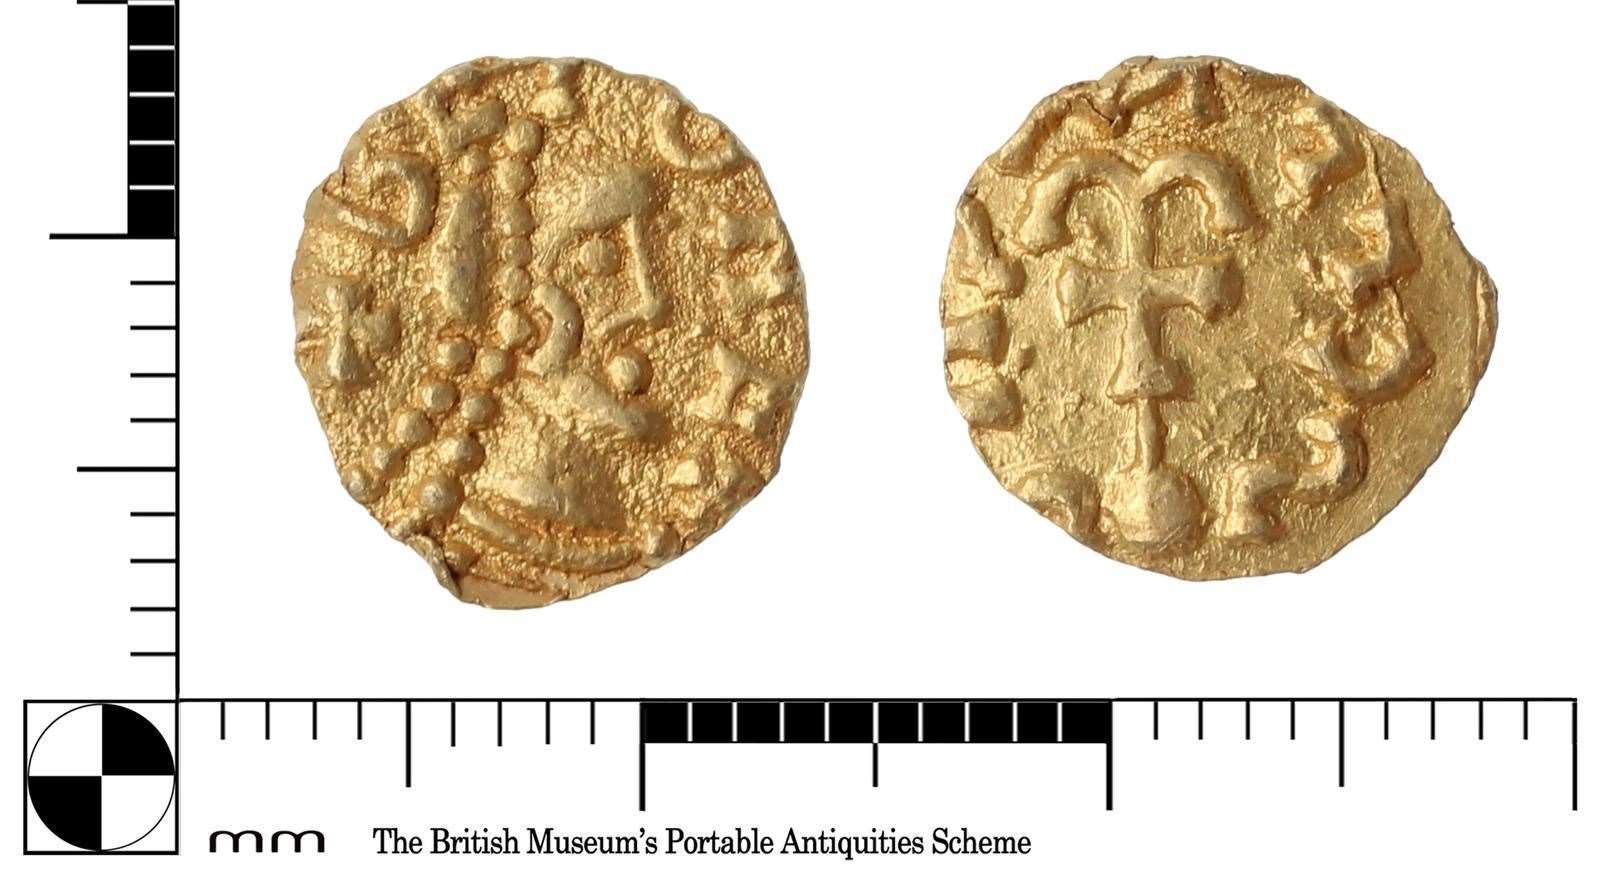 Another of the Merovingian gold tremissis found by David Callow